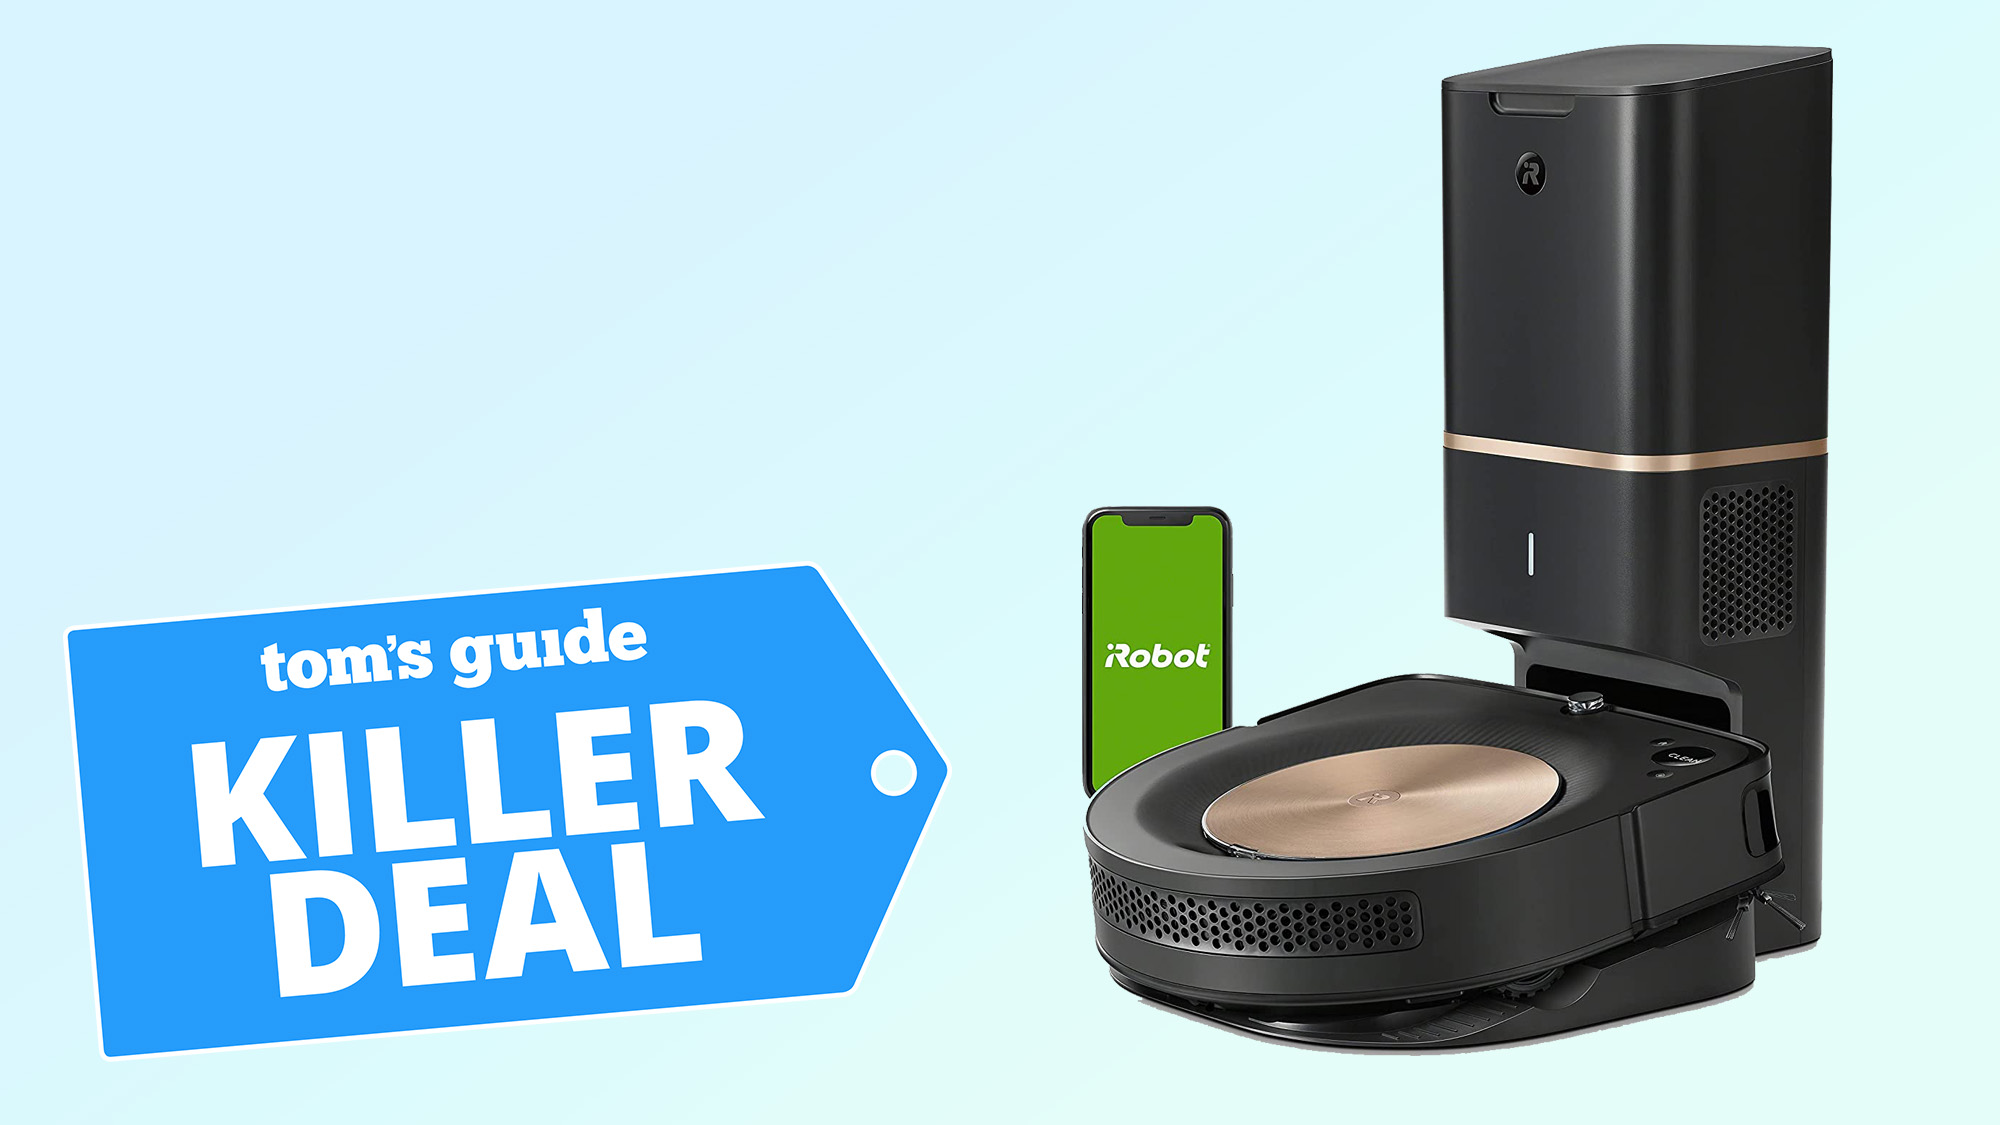 Spring cleaning sale takes $350 off our favorite Roombas | Tom's Guide